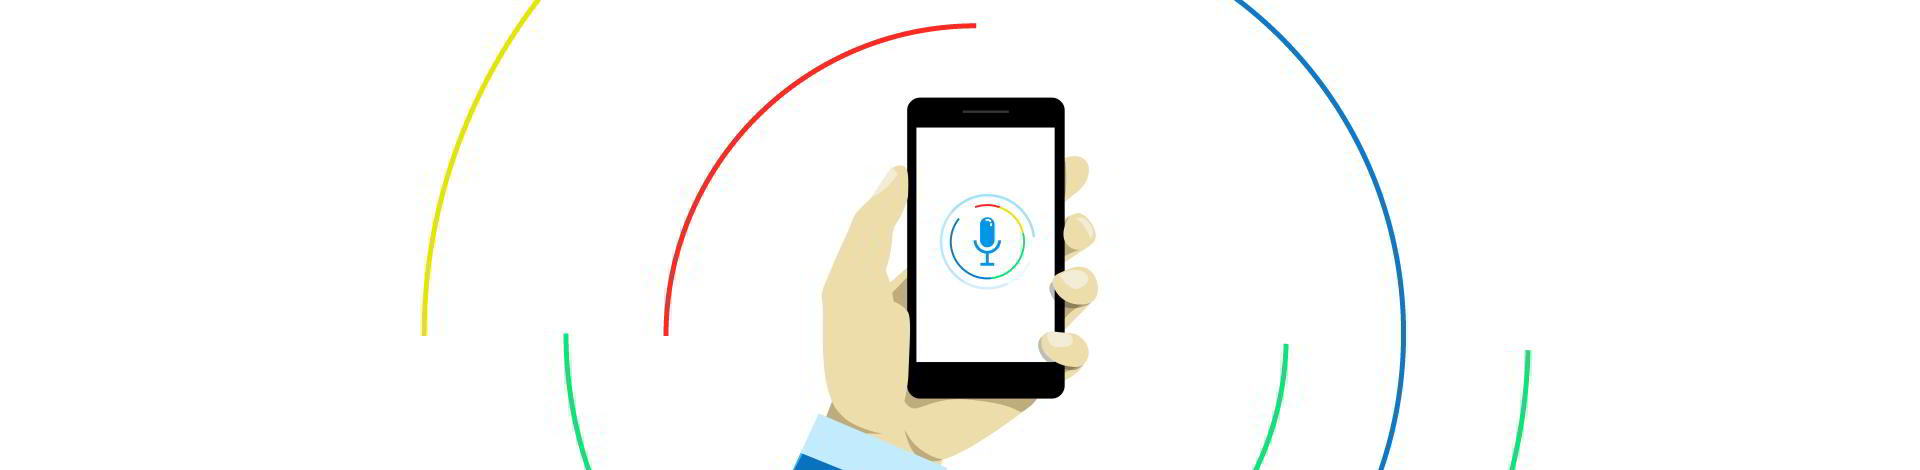 5 Ranking Factors for Voice Search SEO